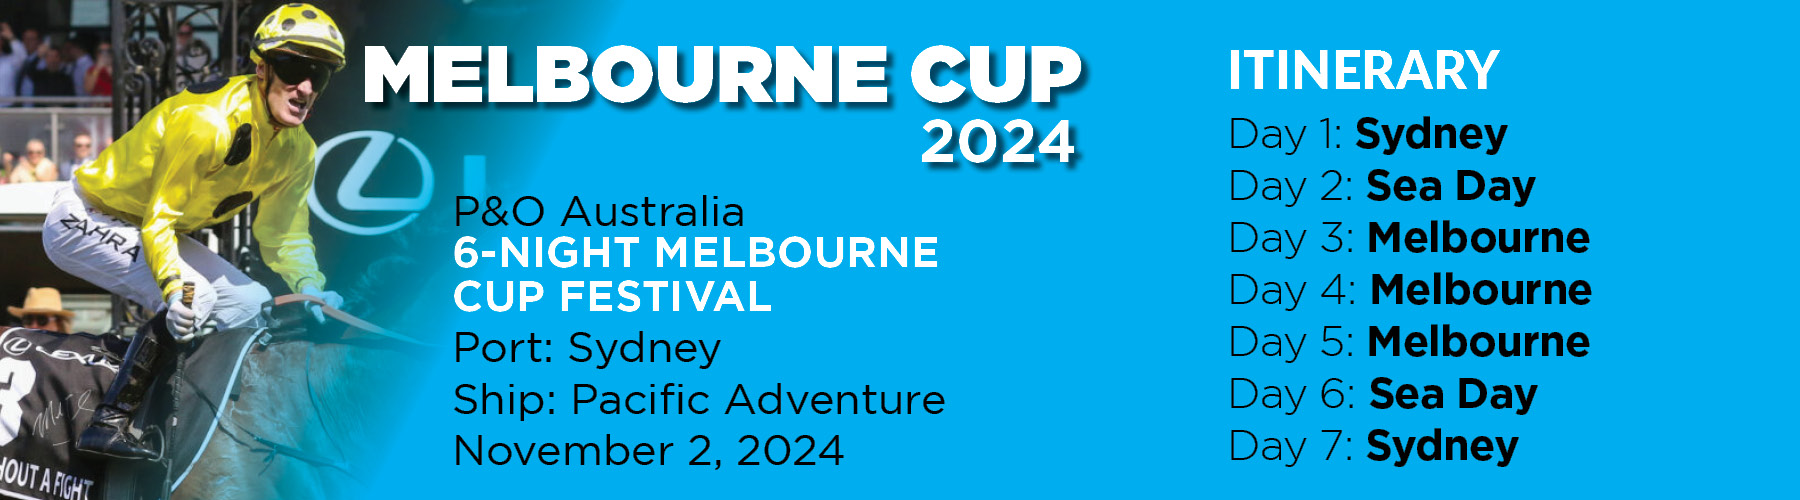 Melbourne Cup Itinerary- Pacific Adventure